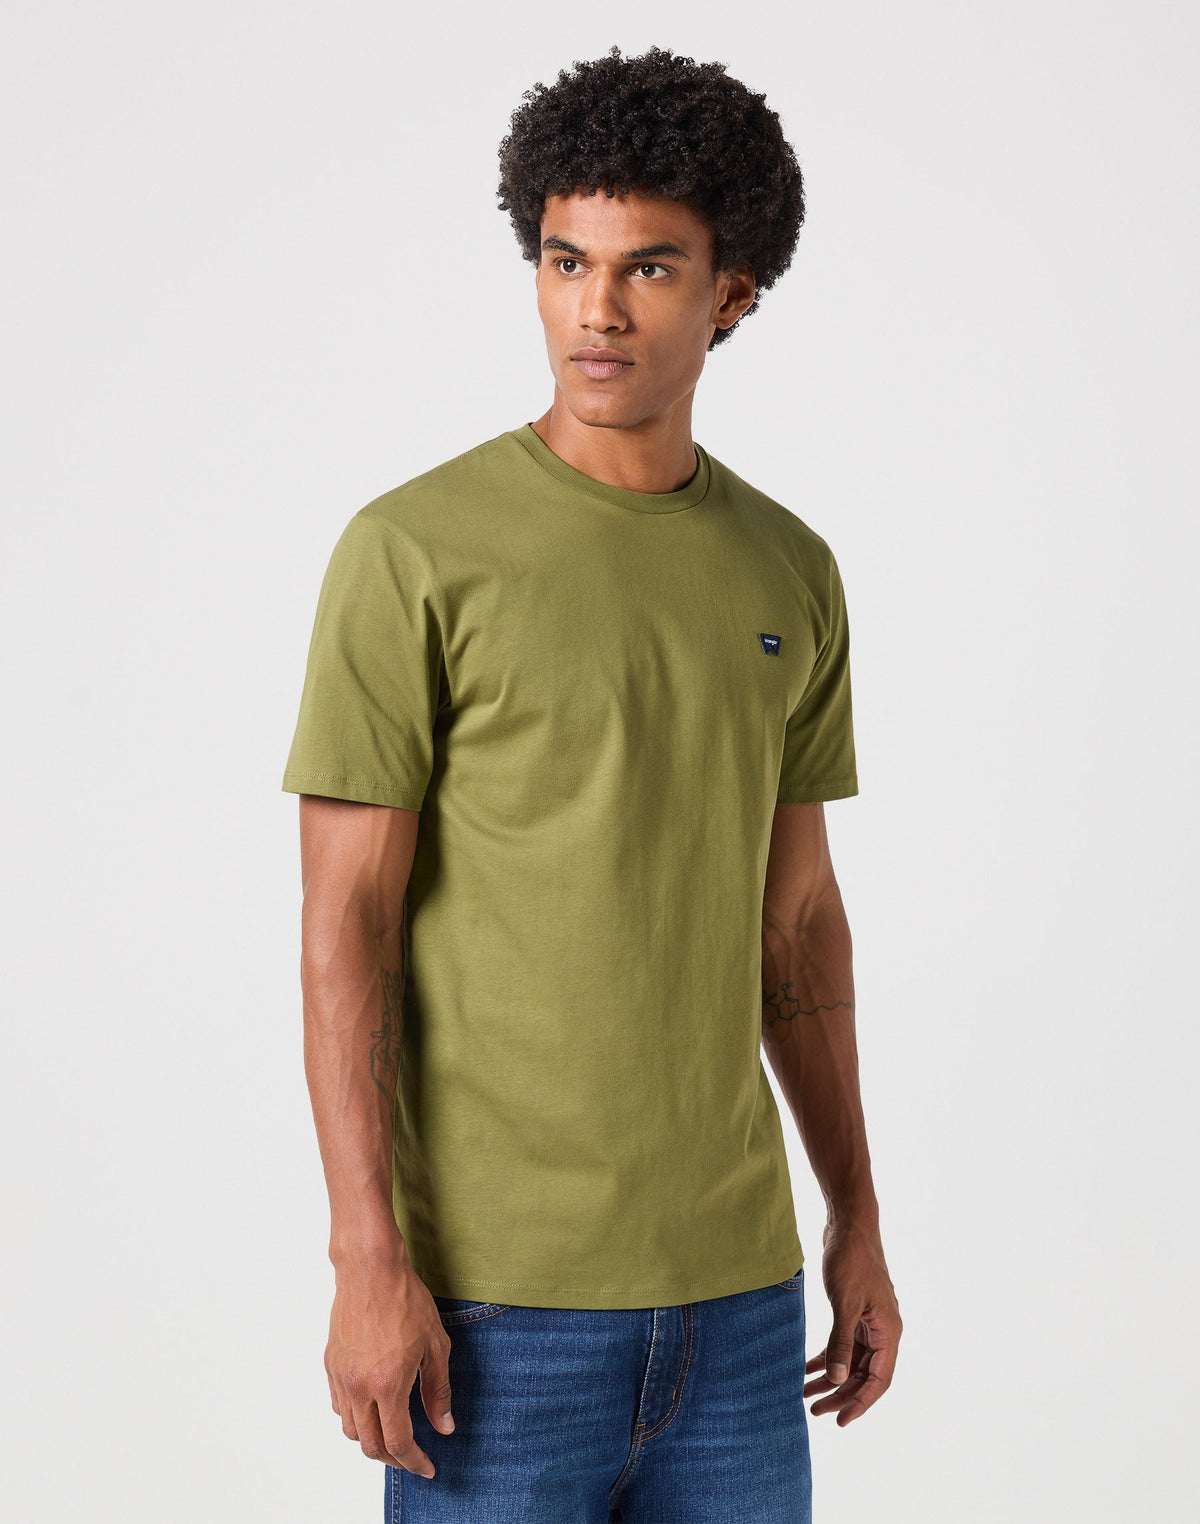 Sign Off Tee in Dusty Olive